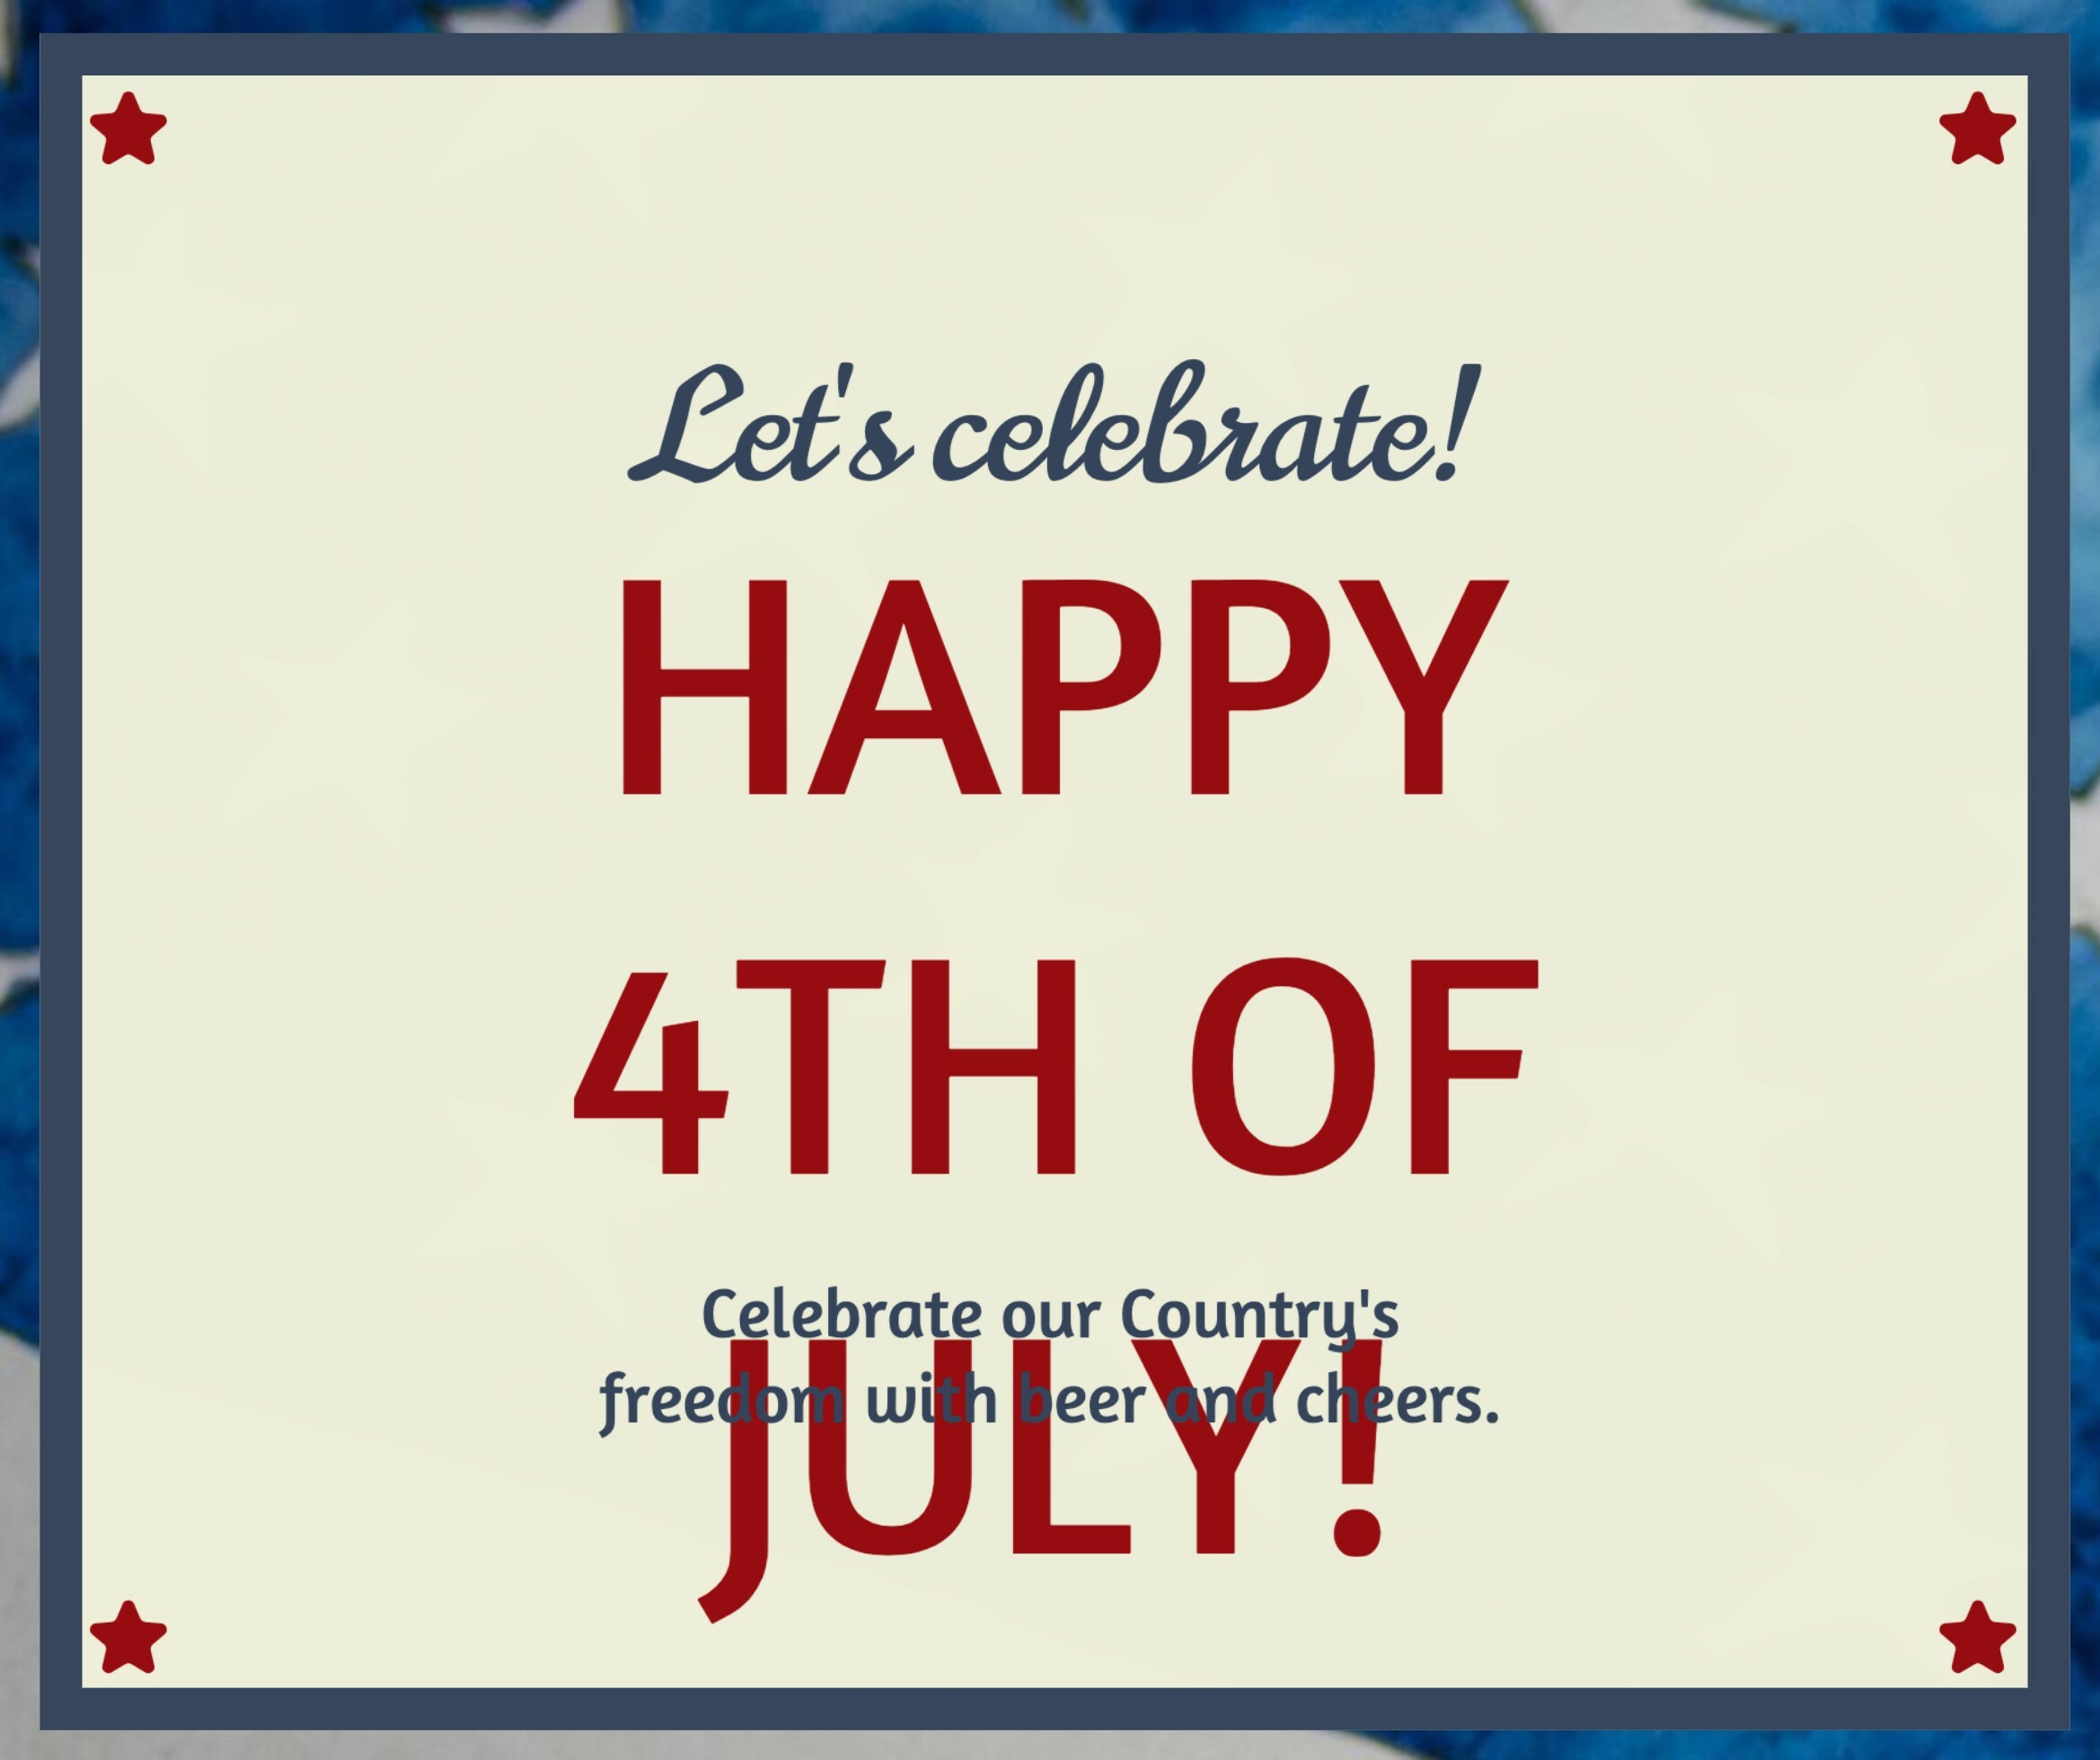 4th of July Celebration template